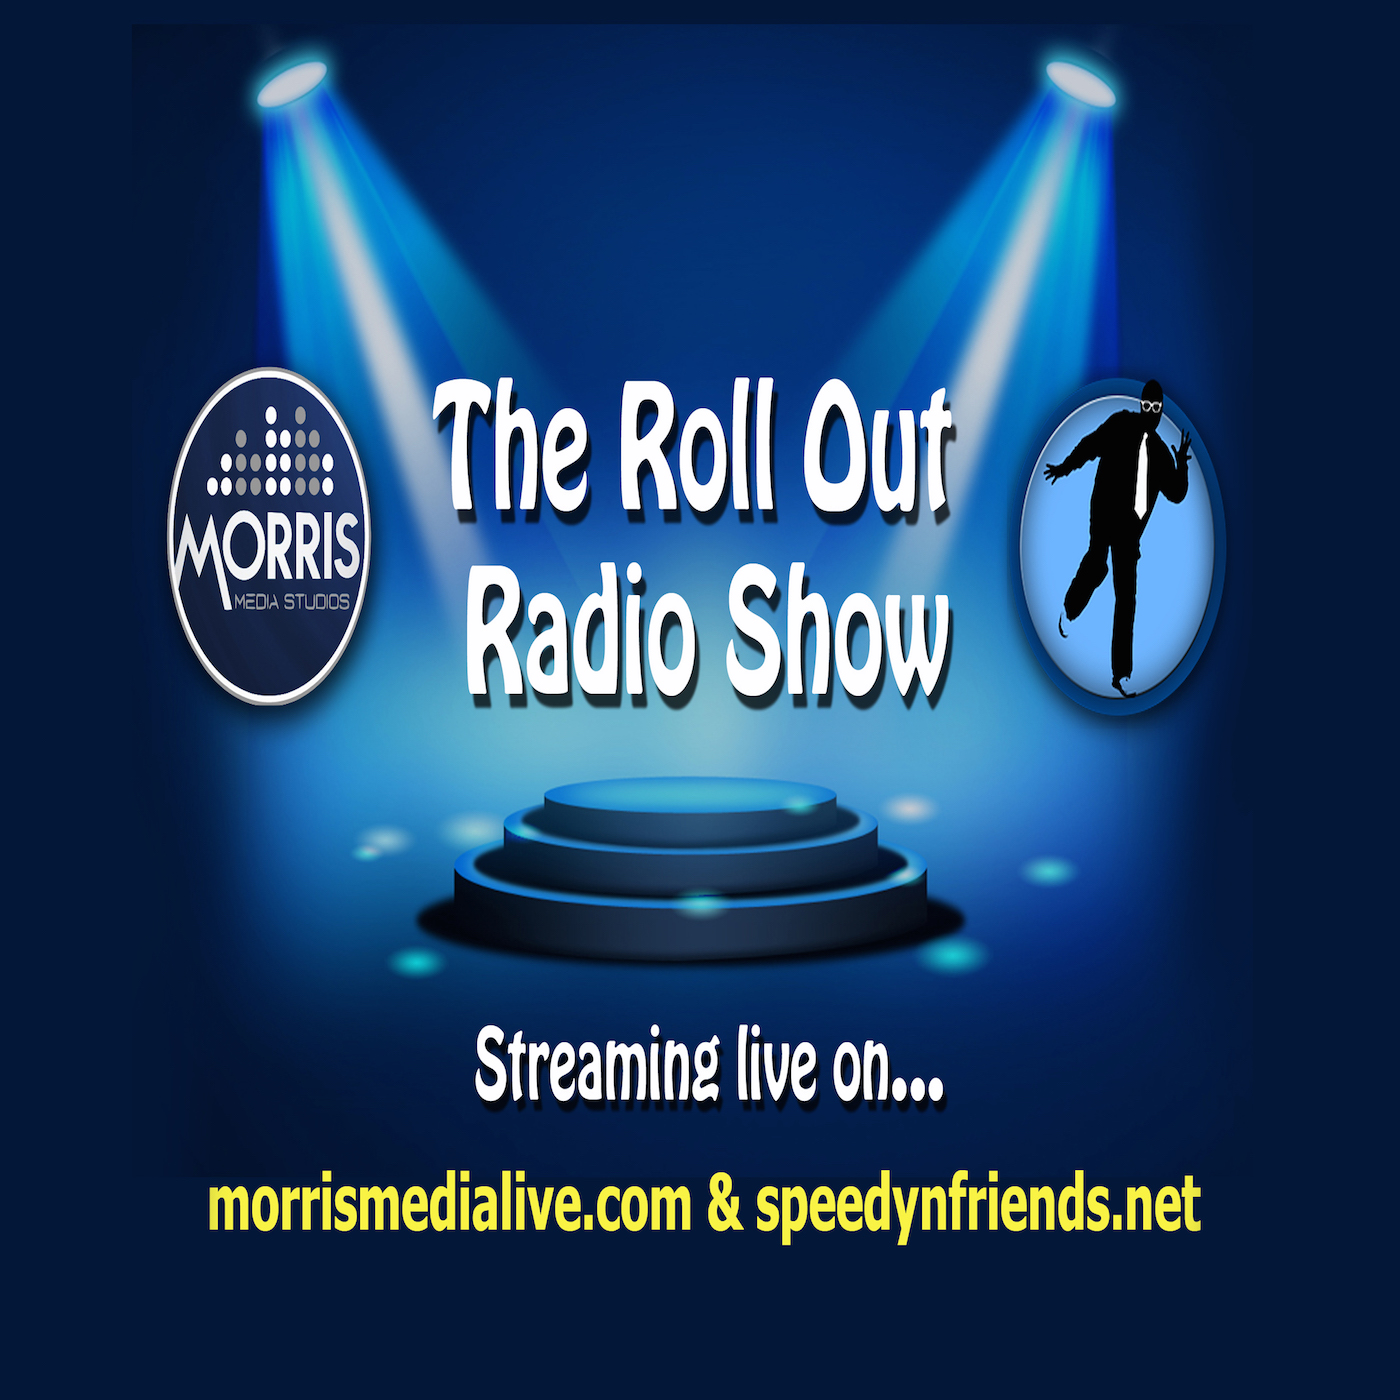 The Roll Out Radio Show 10-23-15